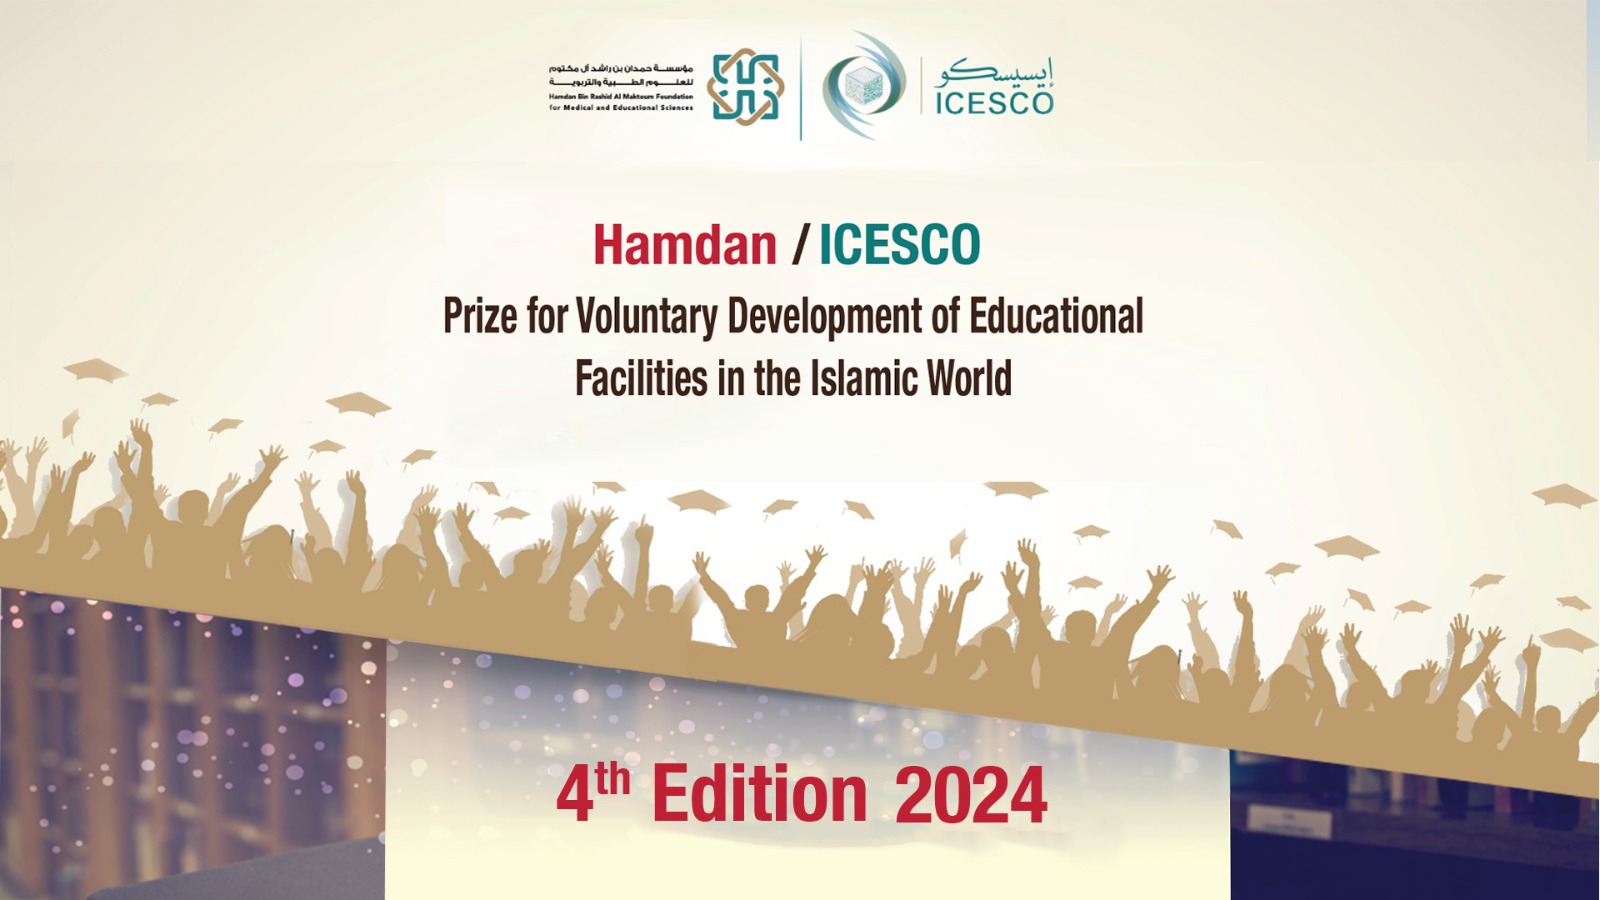 Nominations Open for 4th Edition of ICESCO-Hamdan Prize for Voluntary Development of Educational Facilities 2024